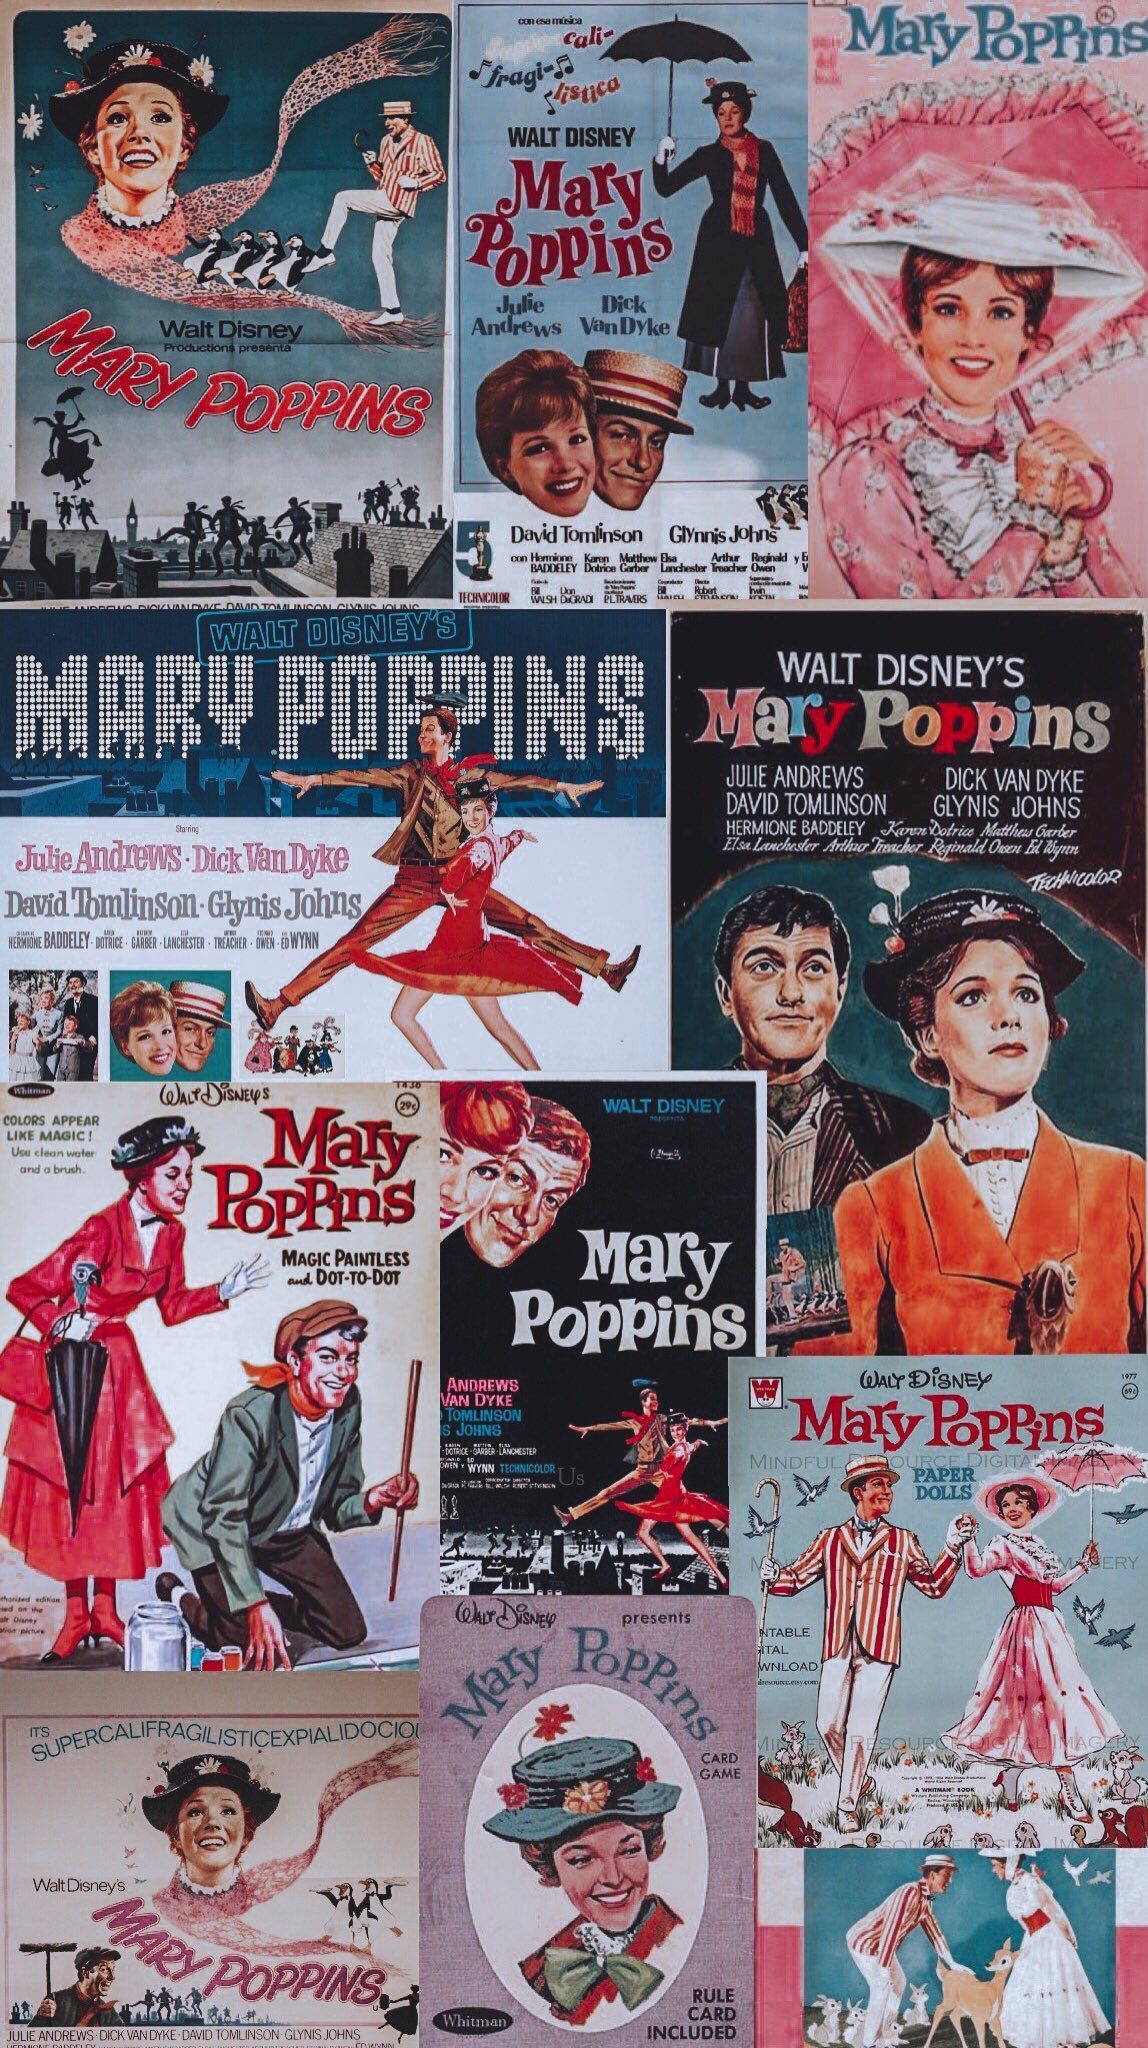 1615 Mary Poppins Images Stock Photos  Vectors  Shutterstock